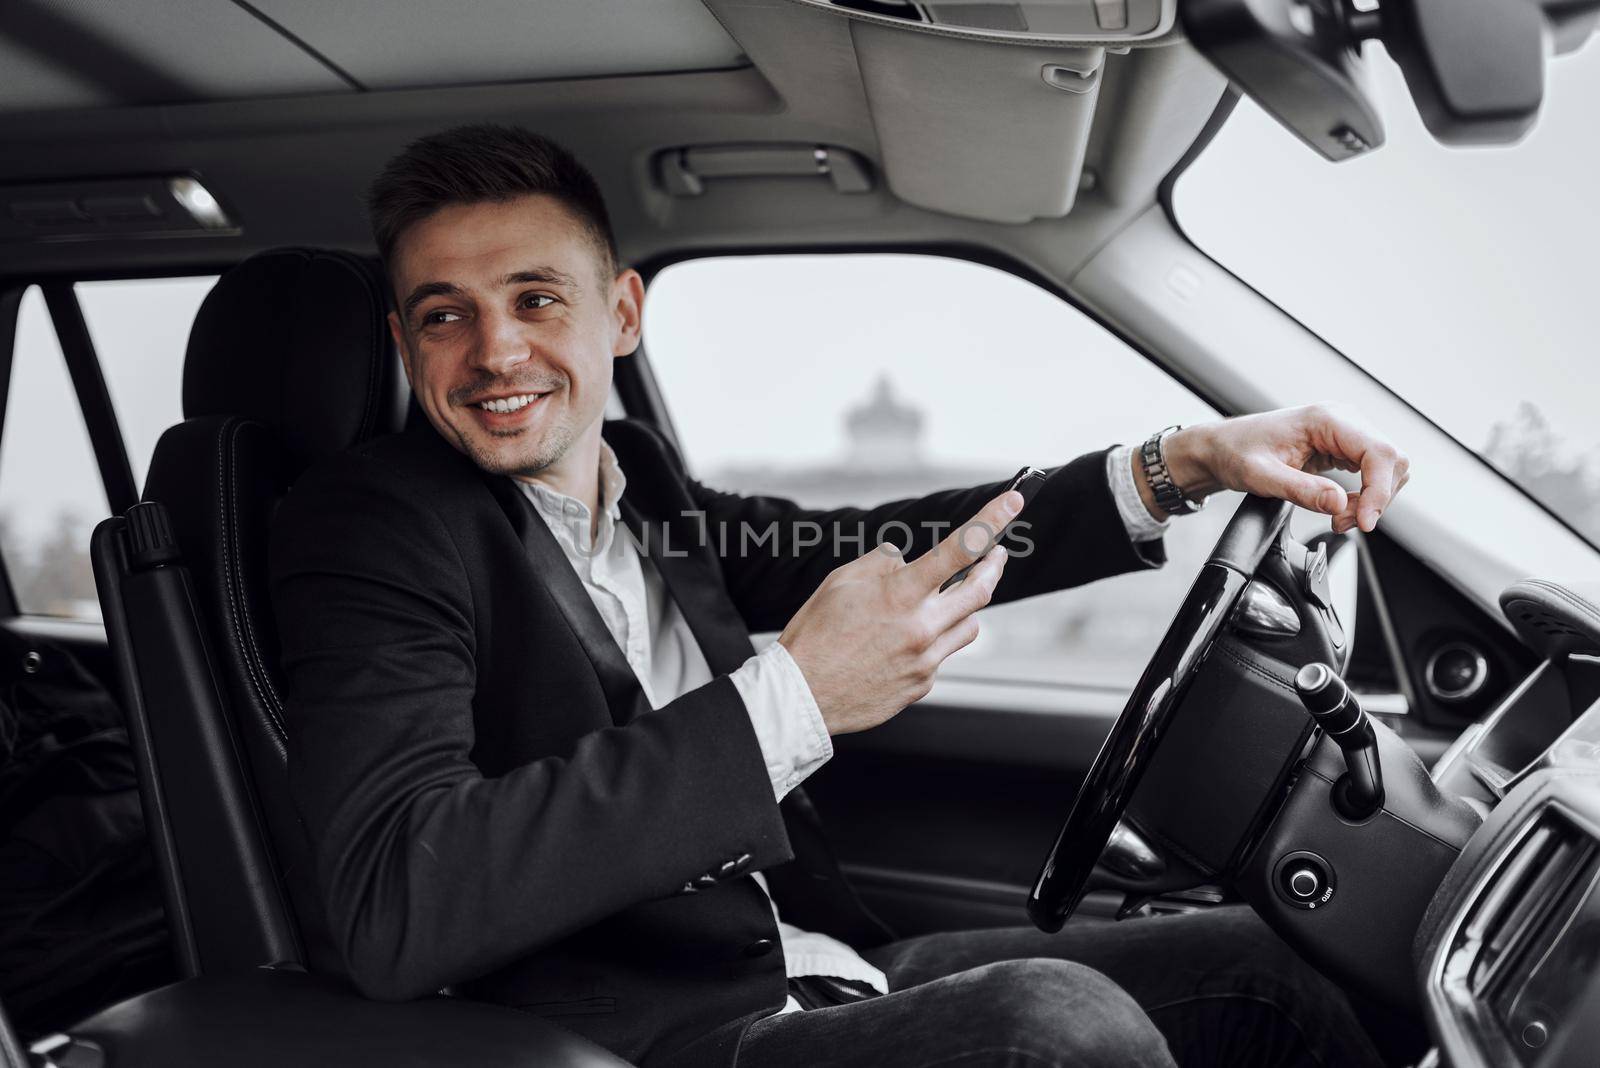 Waist up of smiling handsome man renting automobile and using smartphone. Rent and trade-in concept